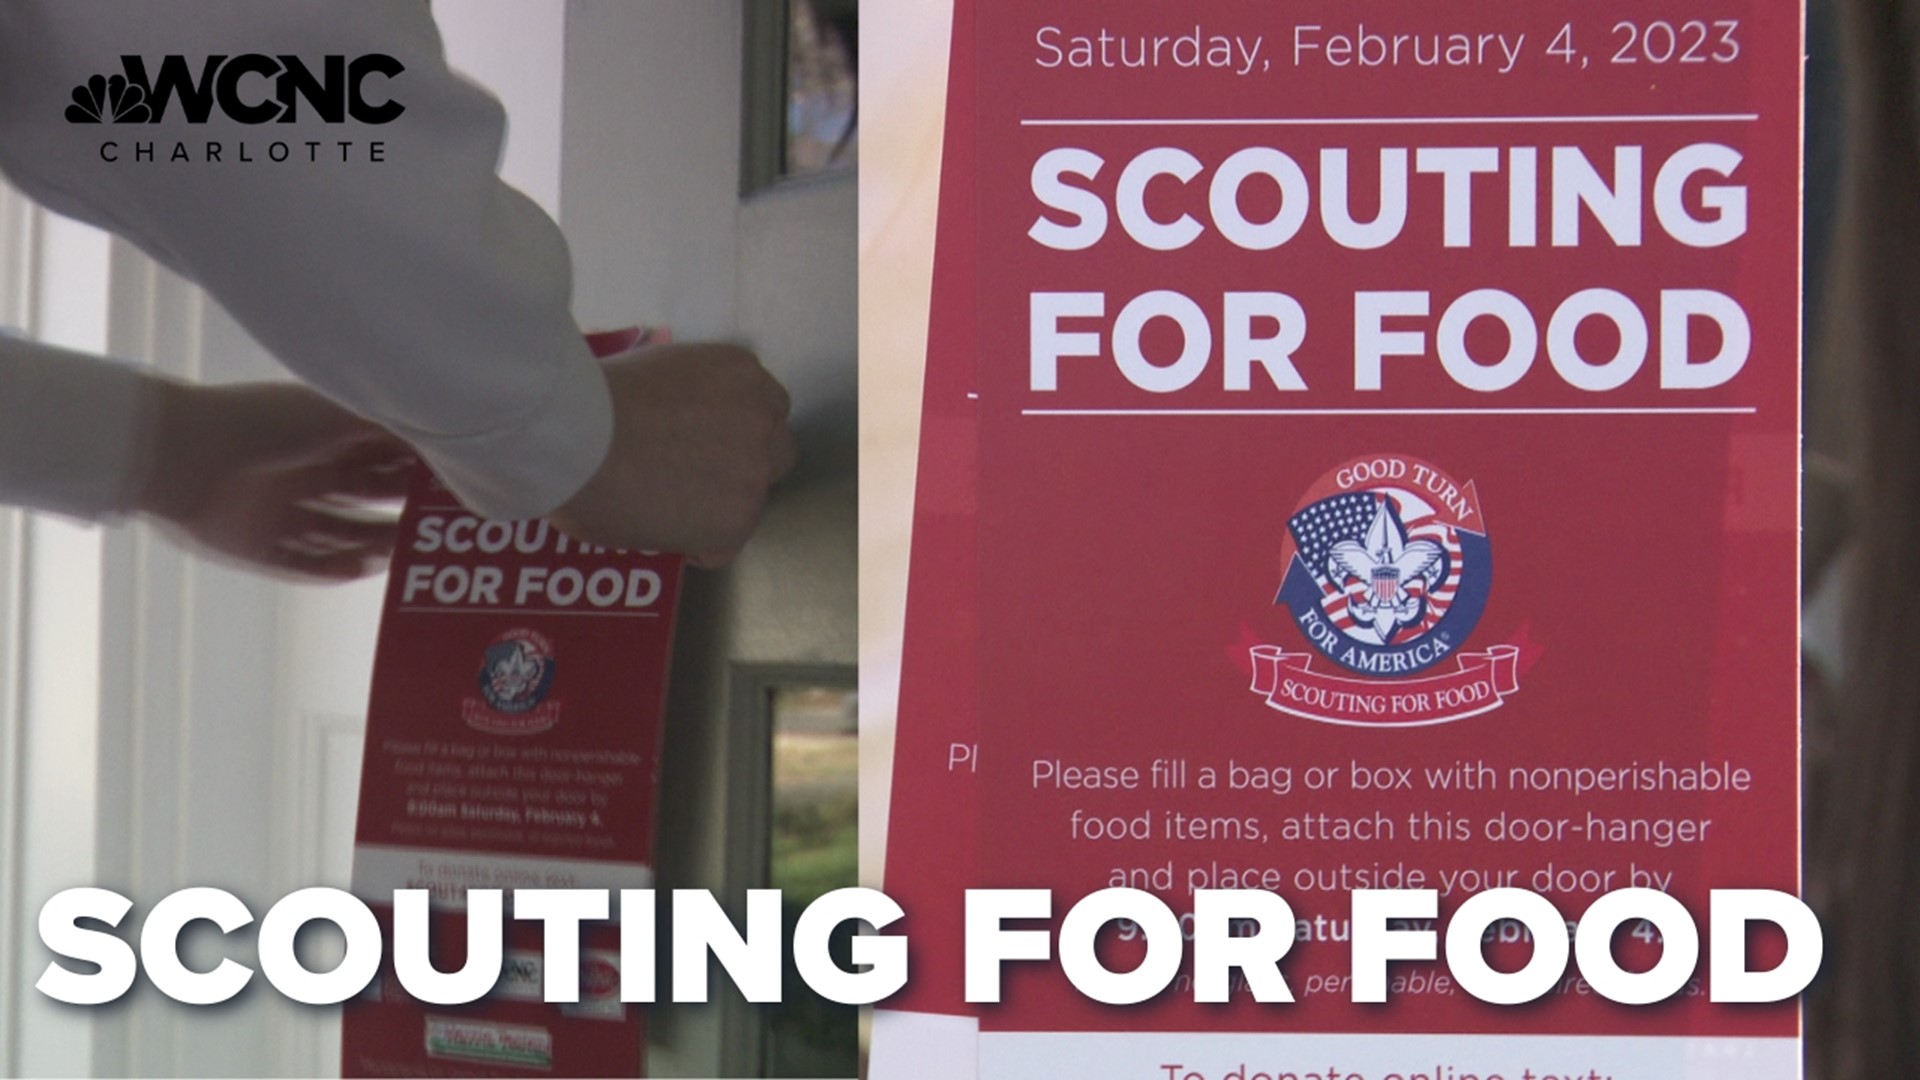 Troop 3, a girl's troop in Charlotte, kicked off their 'Scouting for Food' initiative!